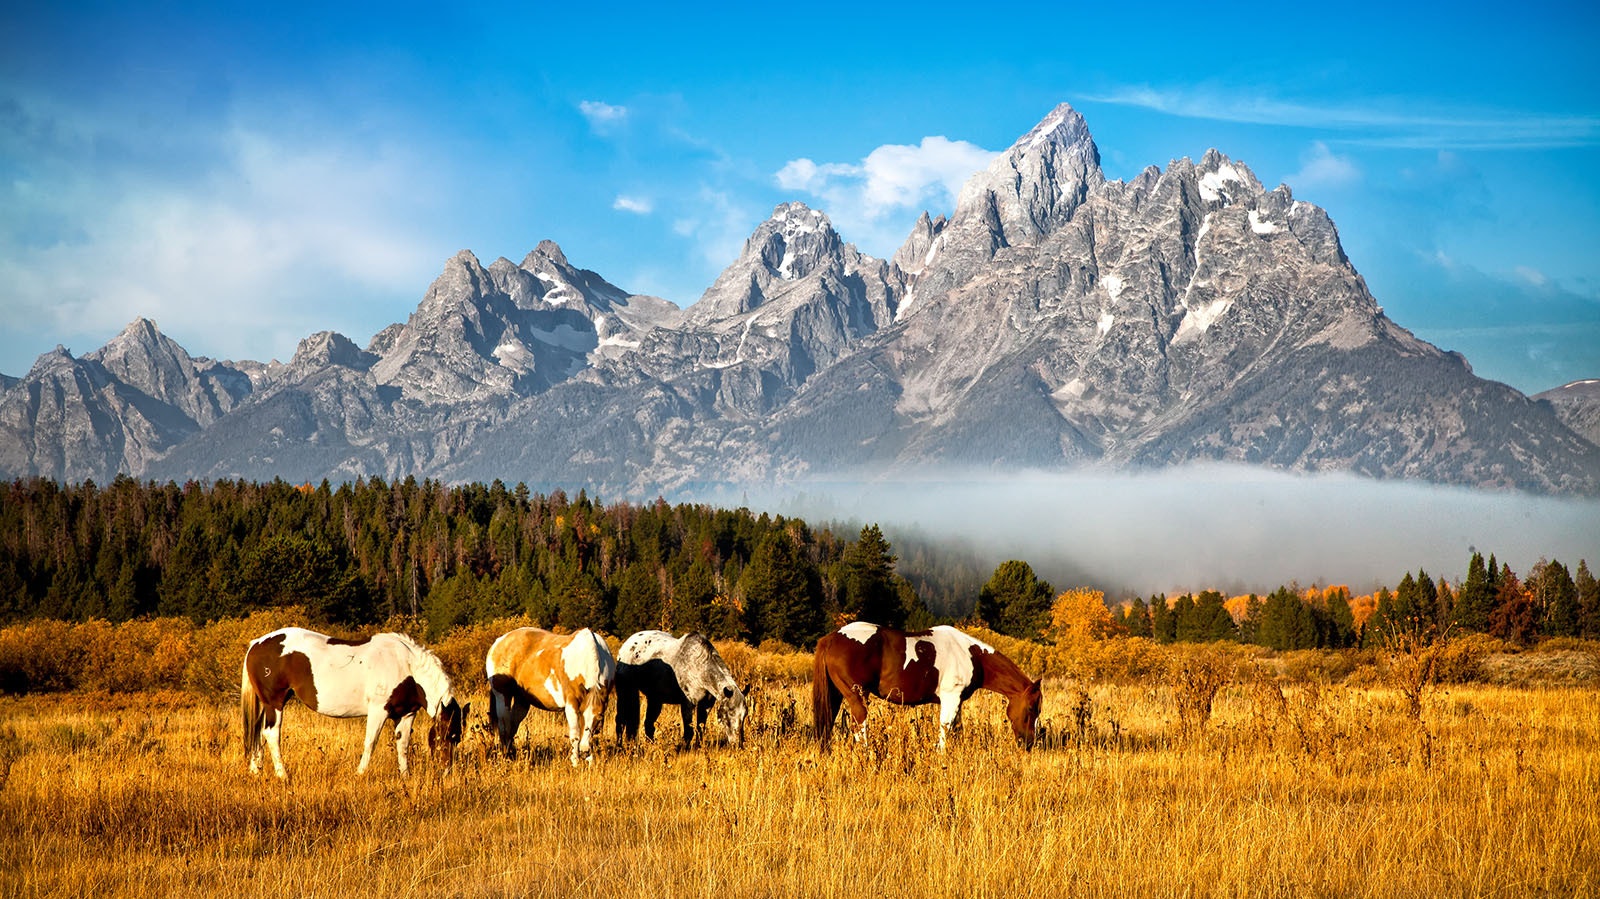 The Grand Tetons, considered a "young" mountain range, is know for its jagged, sharp profiles.